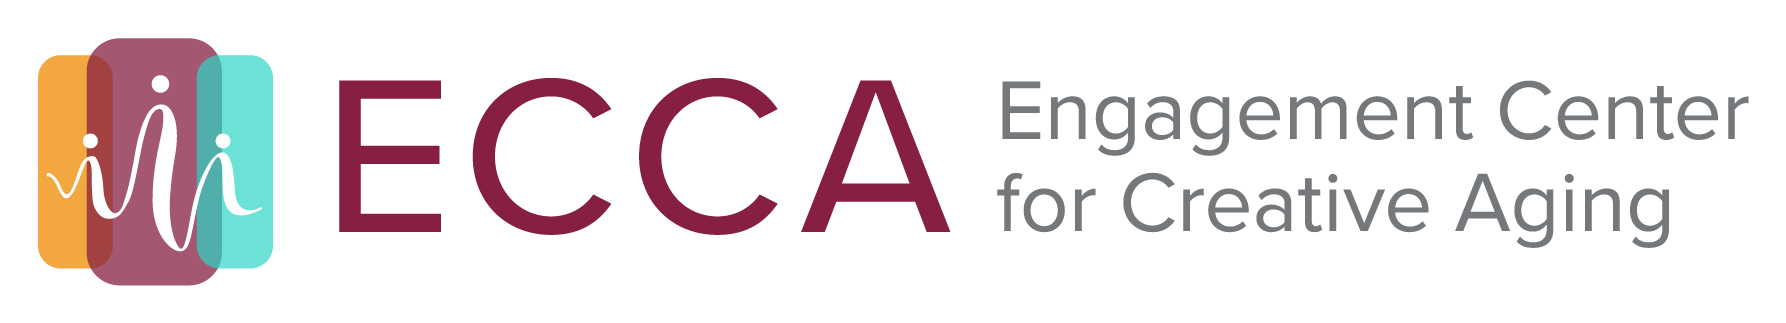 Engagement Center For Creative Aging Logo